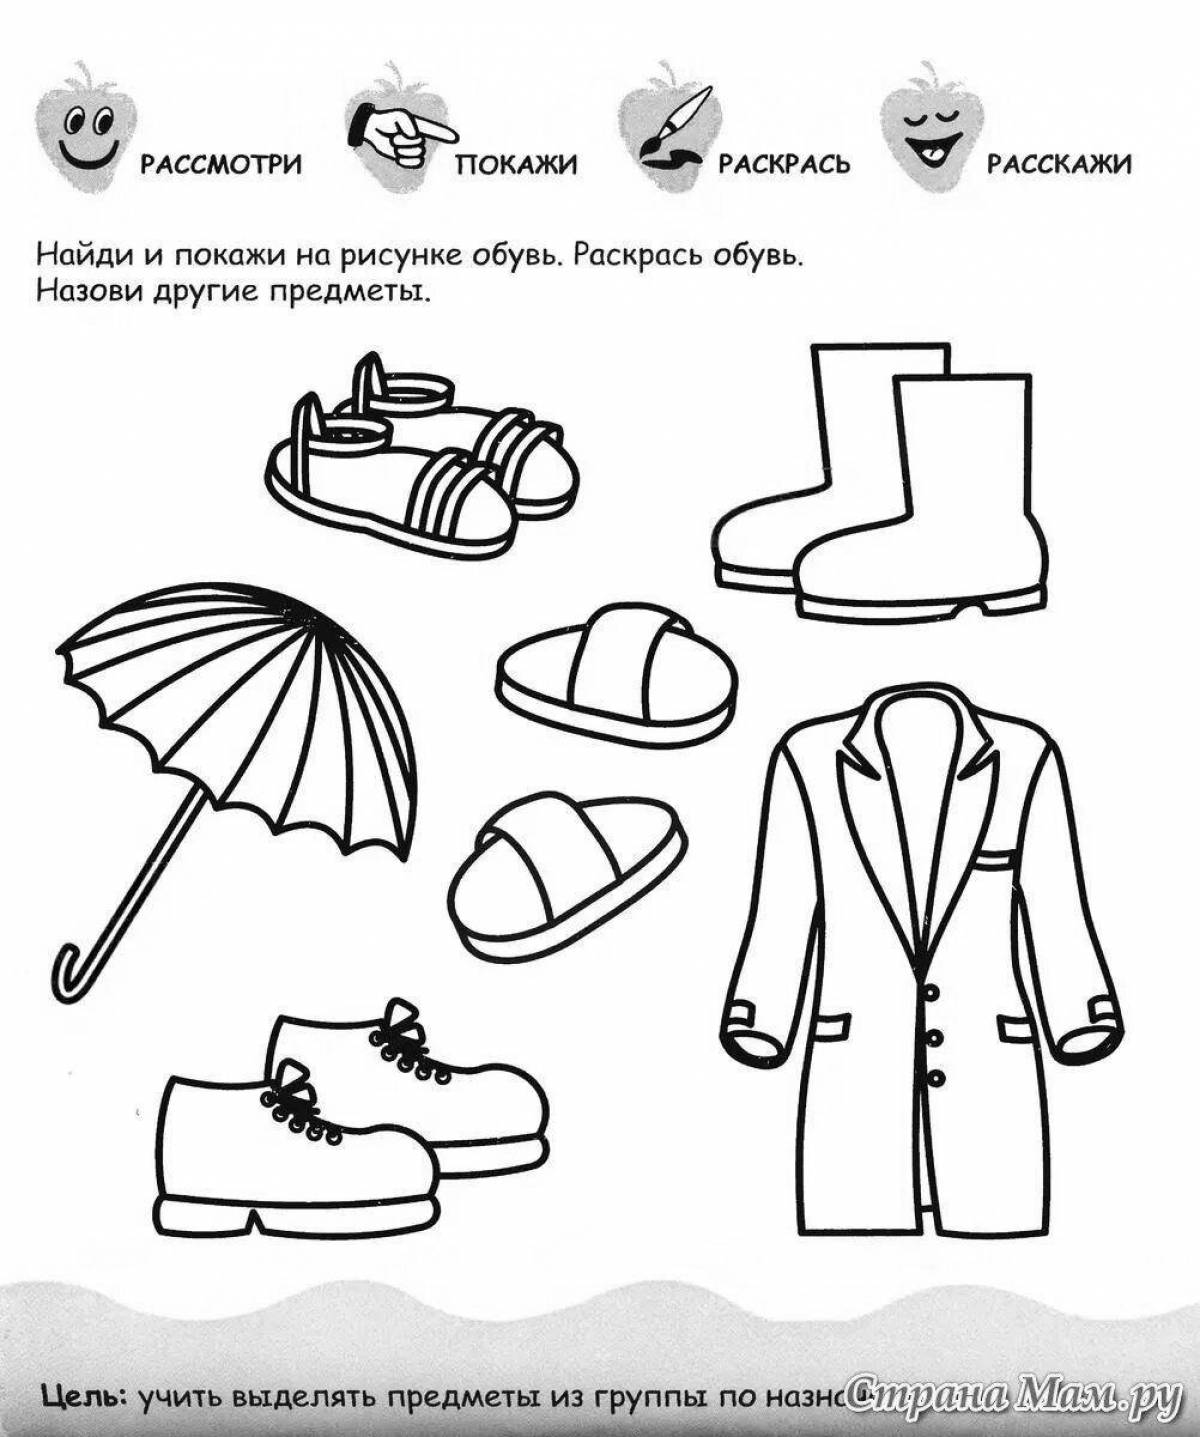 Funny clothes coloring book for 4-5 year olds